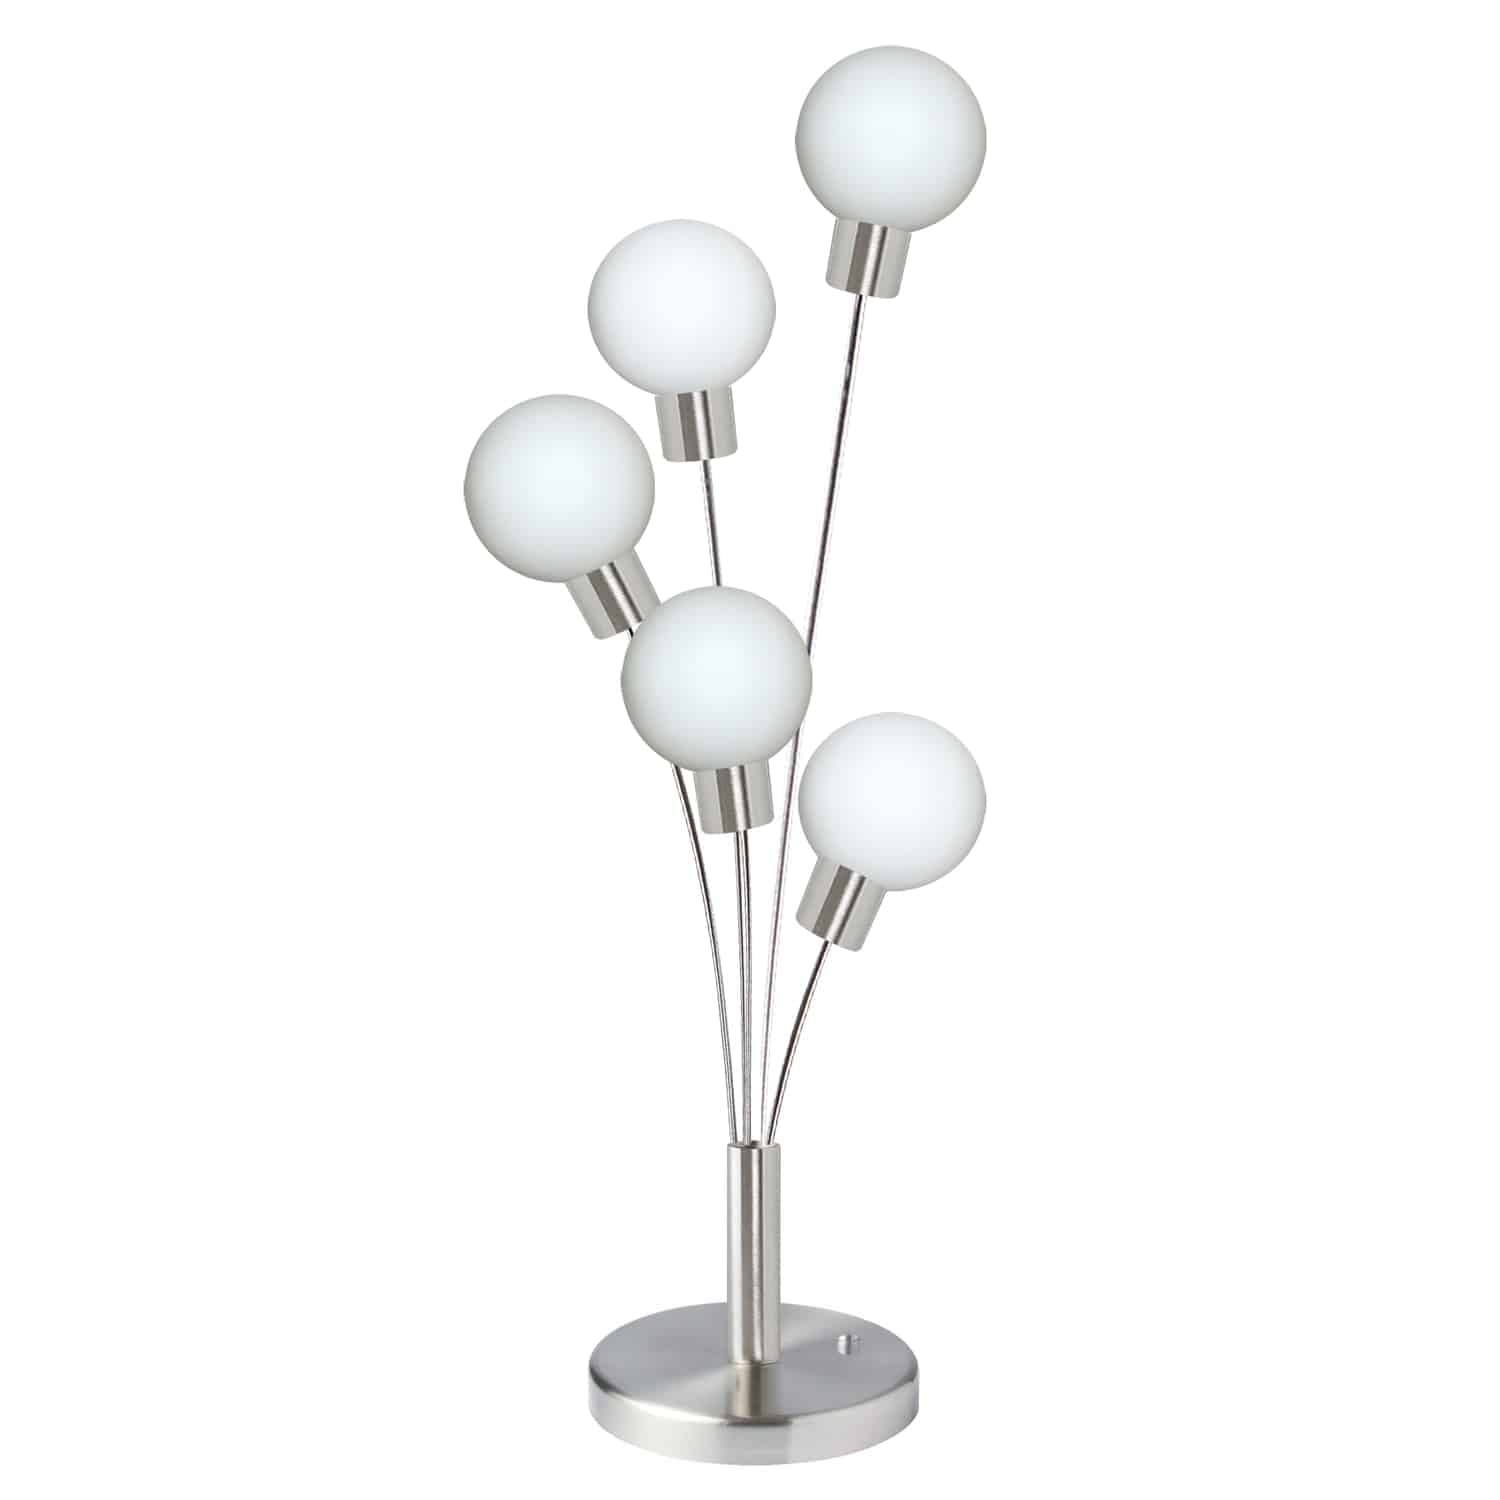 The inspiration for the Budding Branch family of lighting is obvious  the beauty of nature at its peak. Available in either floor or desk configurations, it's a bright and beautiful design with a unique silhouette. The metal frame in your choice of finish springs up from a substantial round base into five branches, each set with a glass globe light. Illumination is cast all around, and softened by your choice of glass finish. With its singular profile and nature-inspired style, Budding Branch family works with transitional and modern décor schemes in a bedroom, living room or fashionable office space.